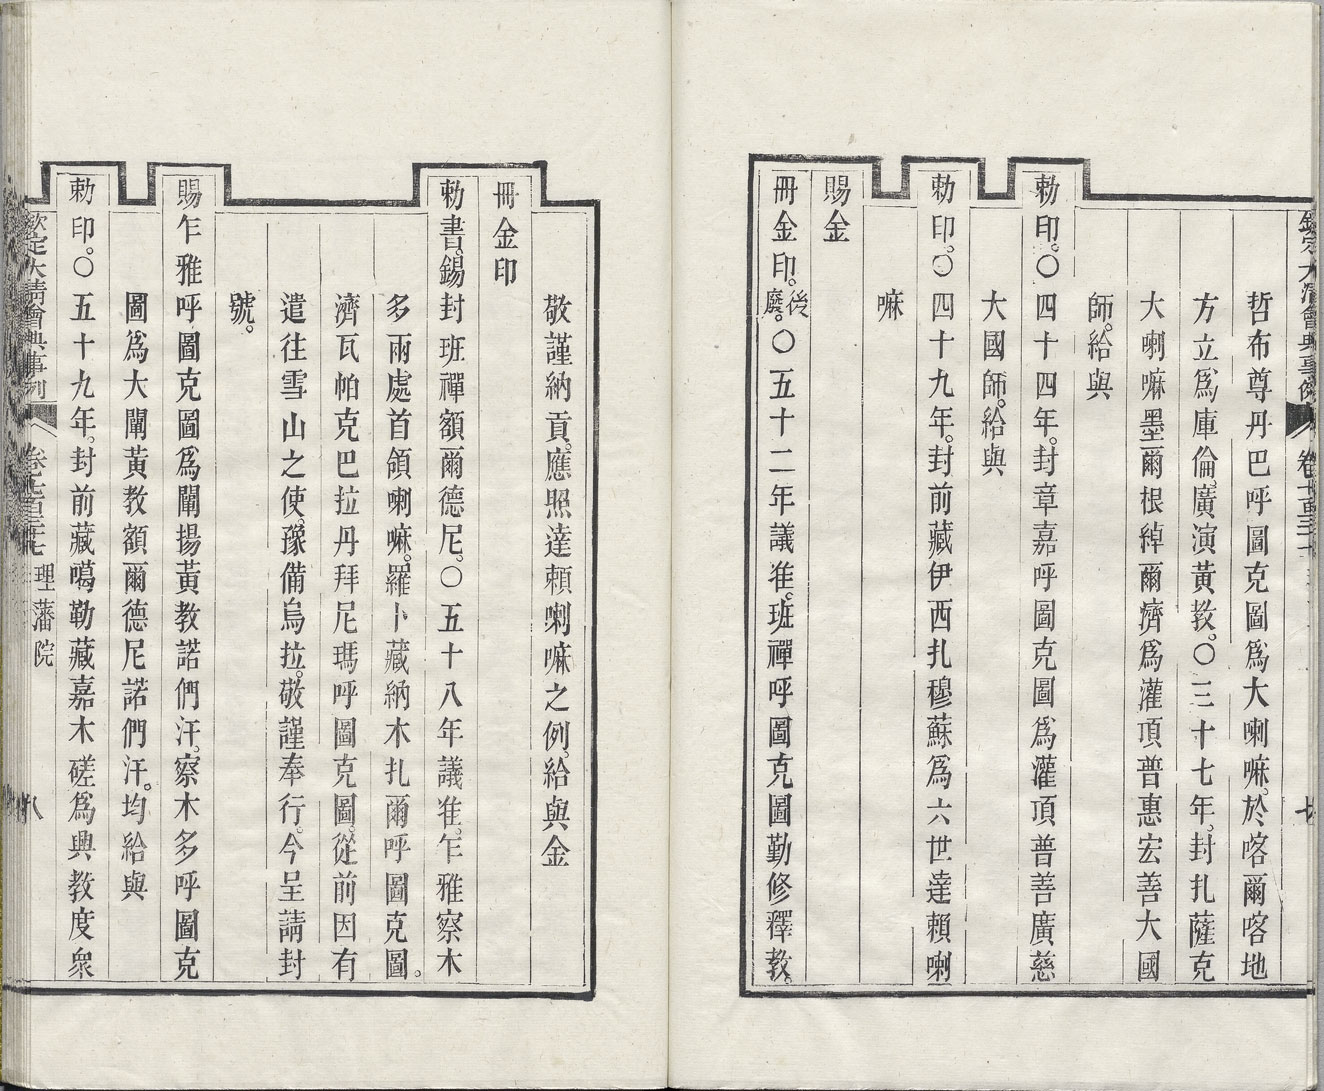 Entry for 'Lama Fenghao (Titles Bestowed upon Lamas)' in the chapter on Lifan Yuan (Board for the Administration of Outlying Regions)